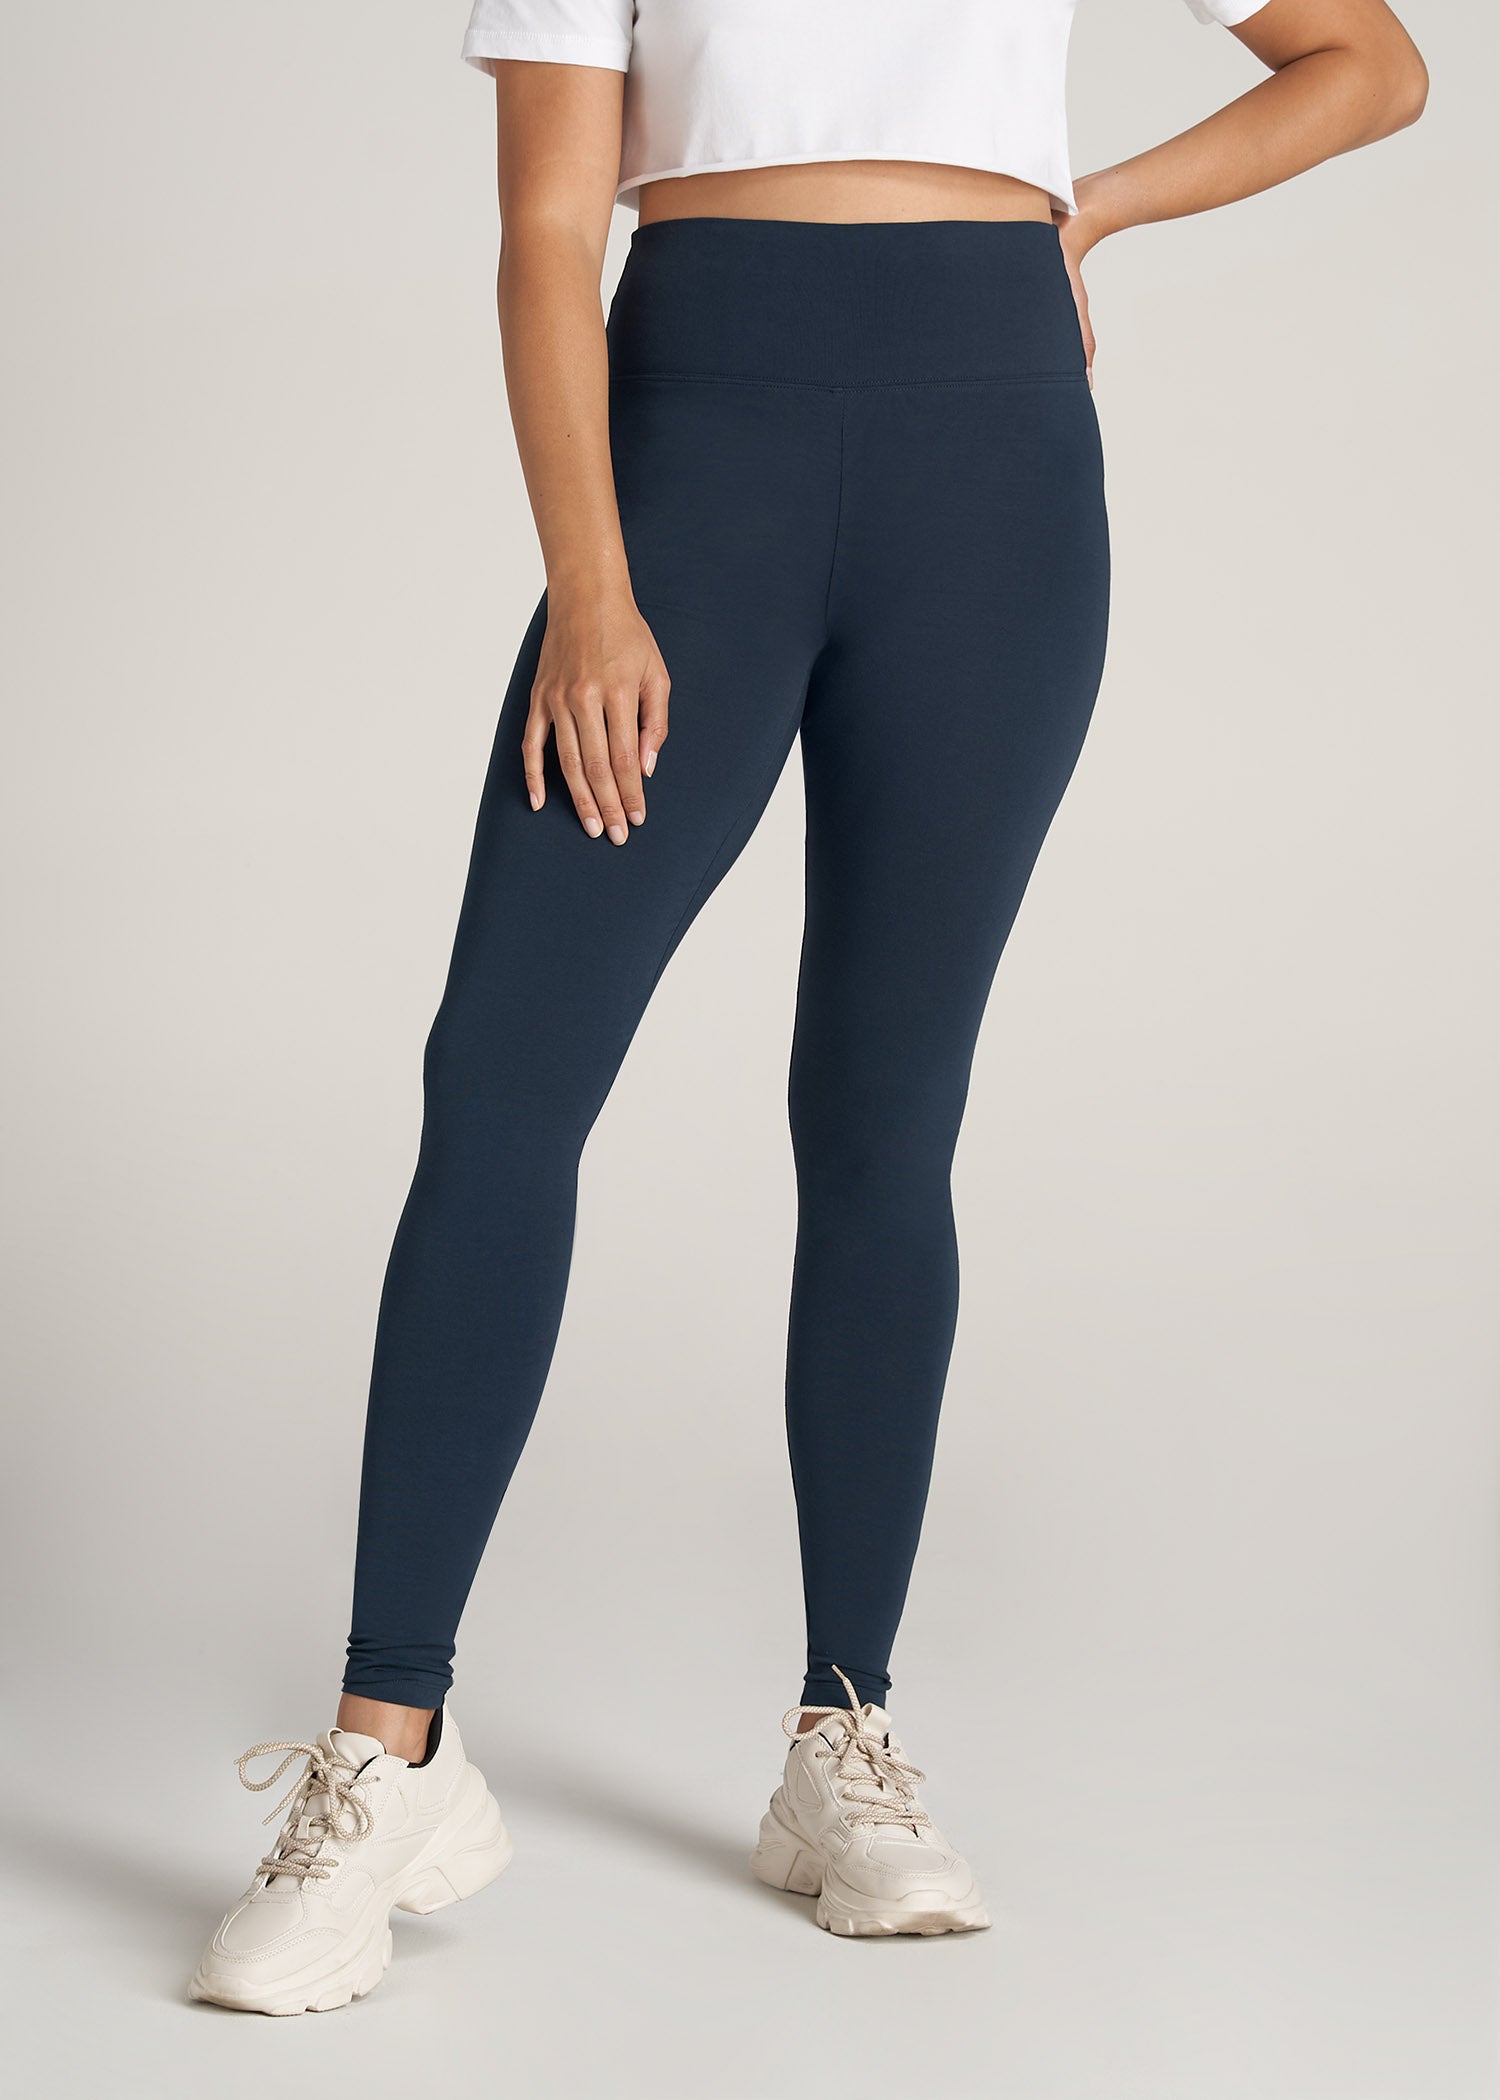 High-Waisted PureLuxe Minimal Legging - Fabletics Canada